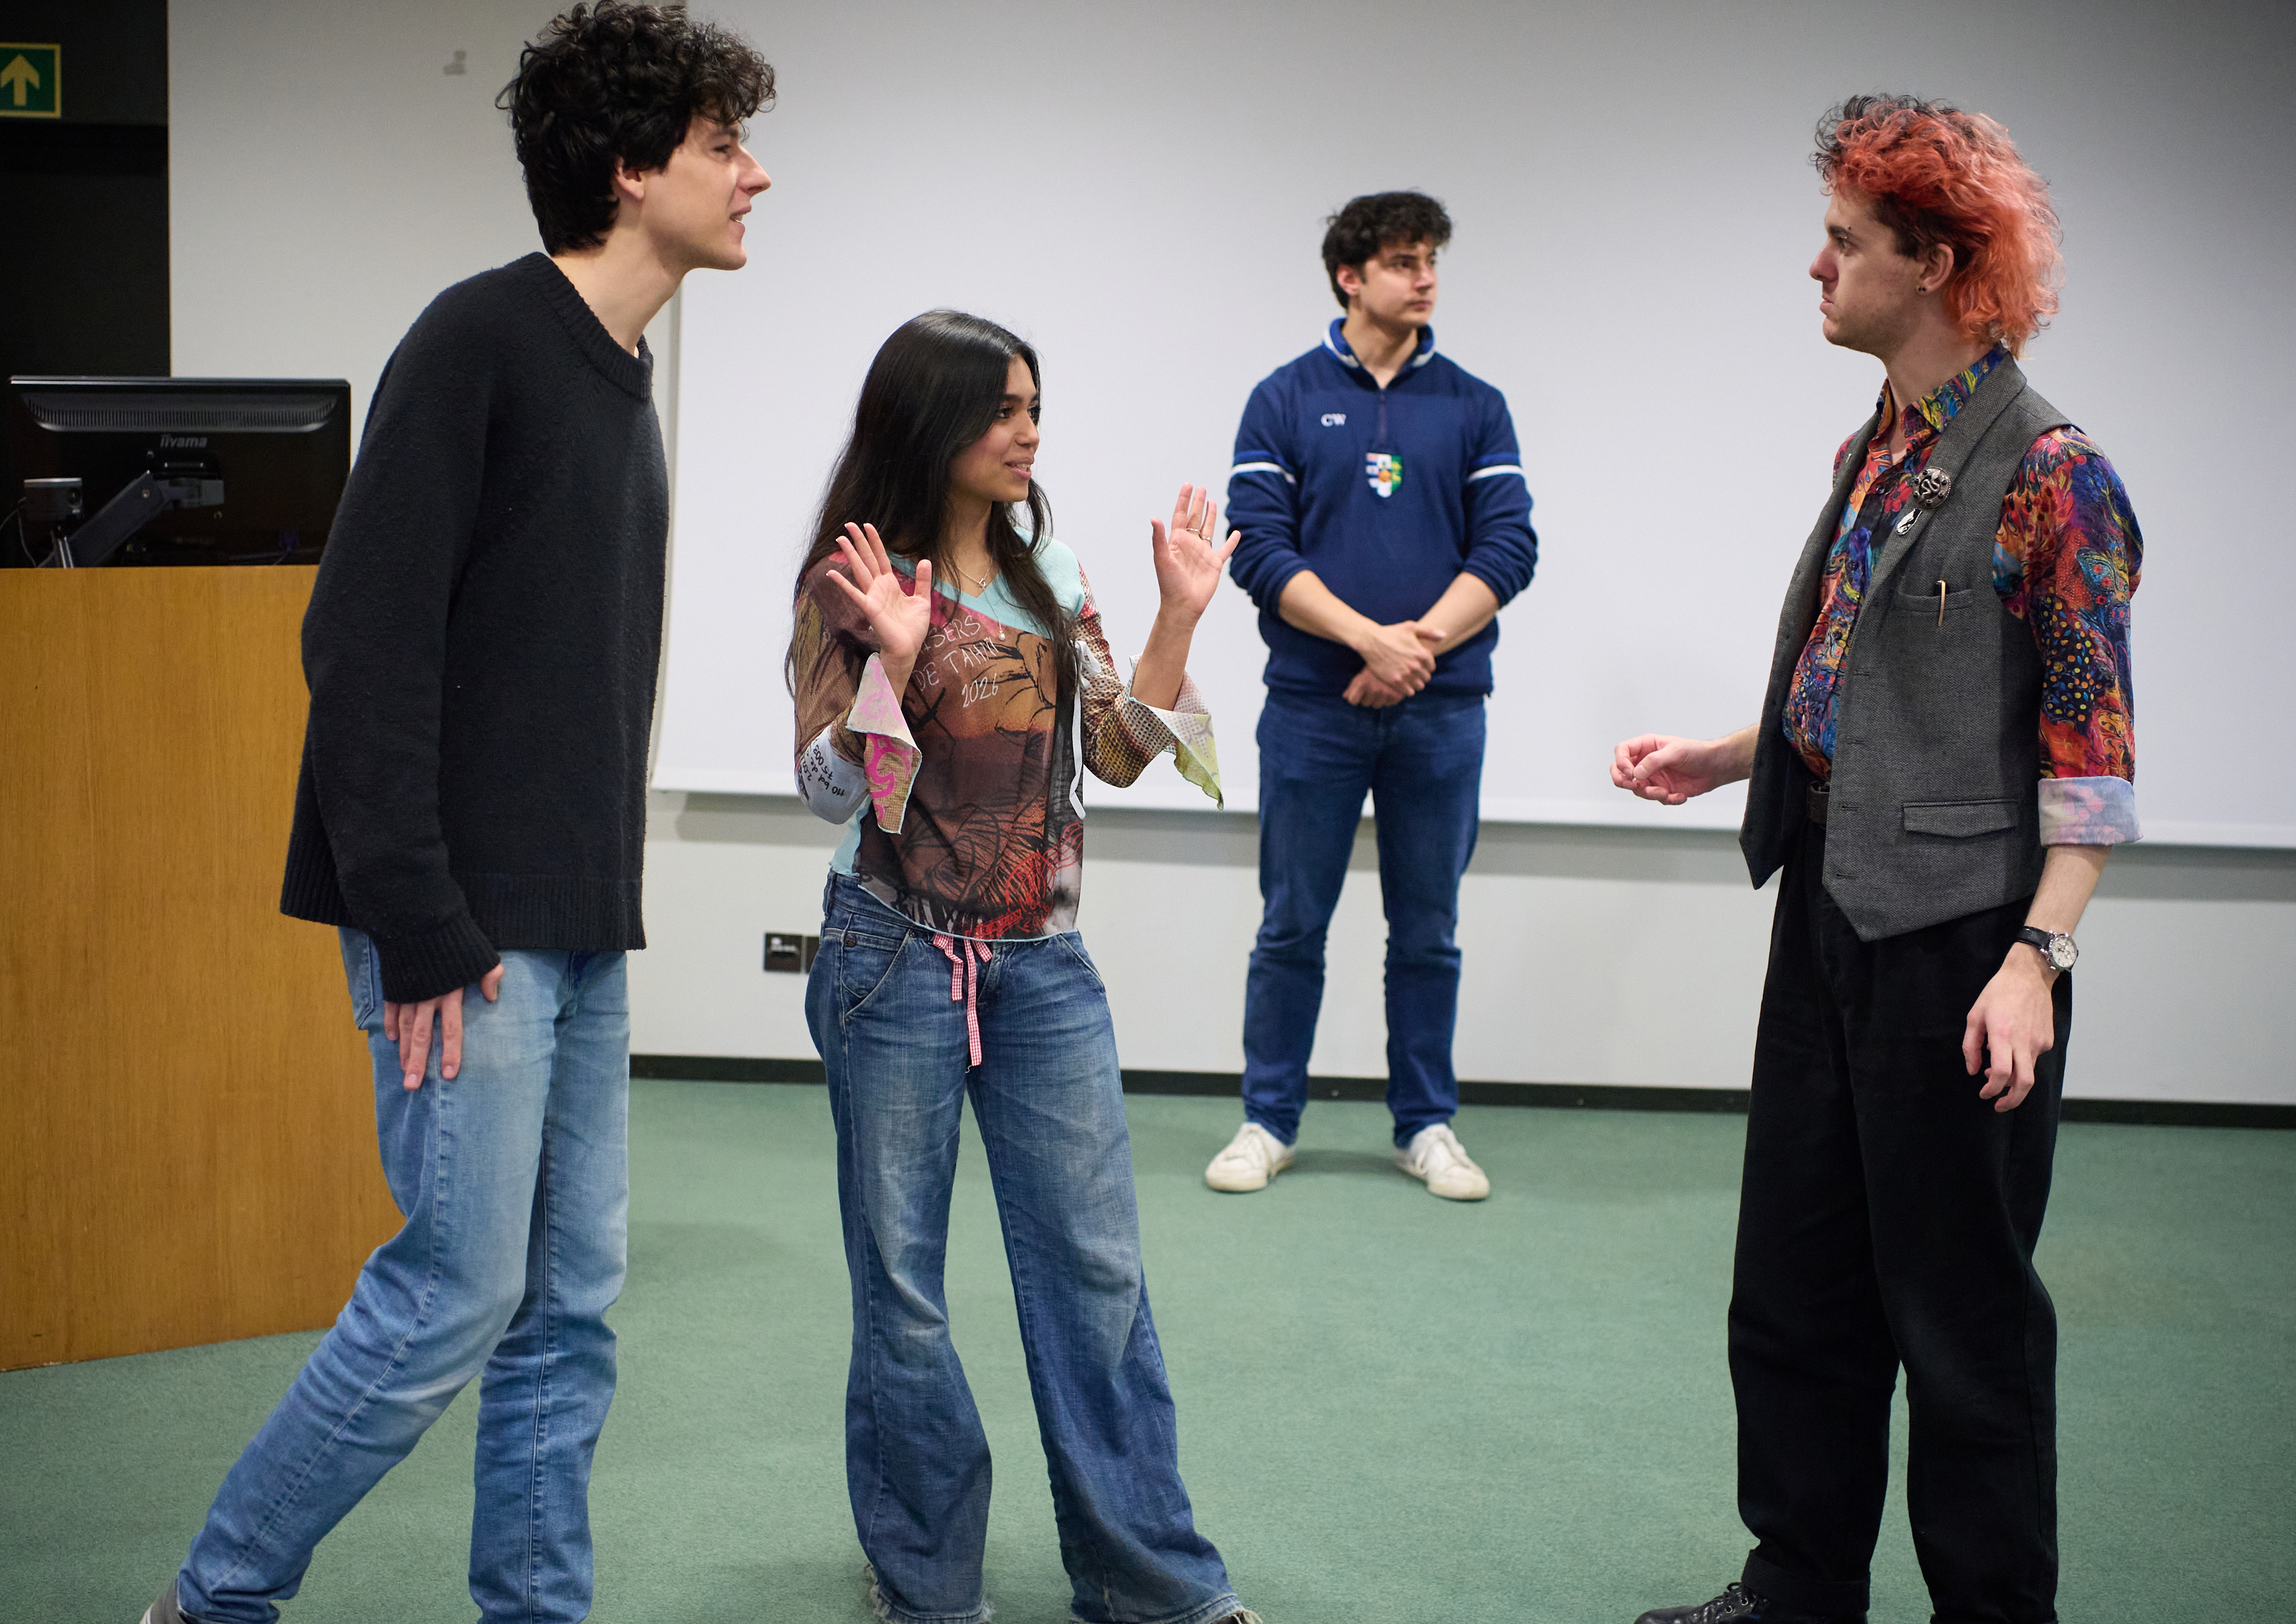 Three people stand in conversation in the foreground, another stands further away in the background. One of the three has their hands raised, while the other two stare at one another.